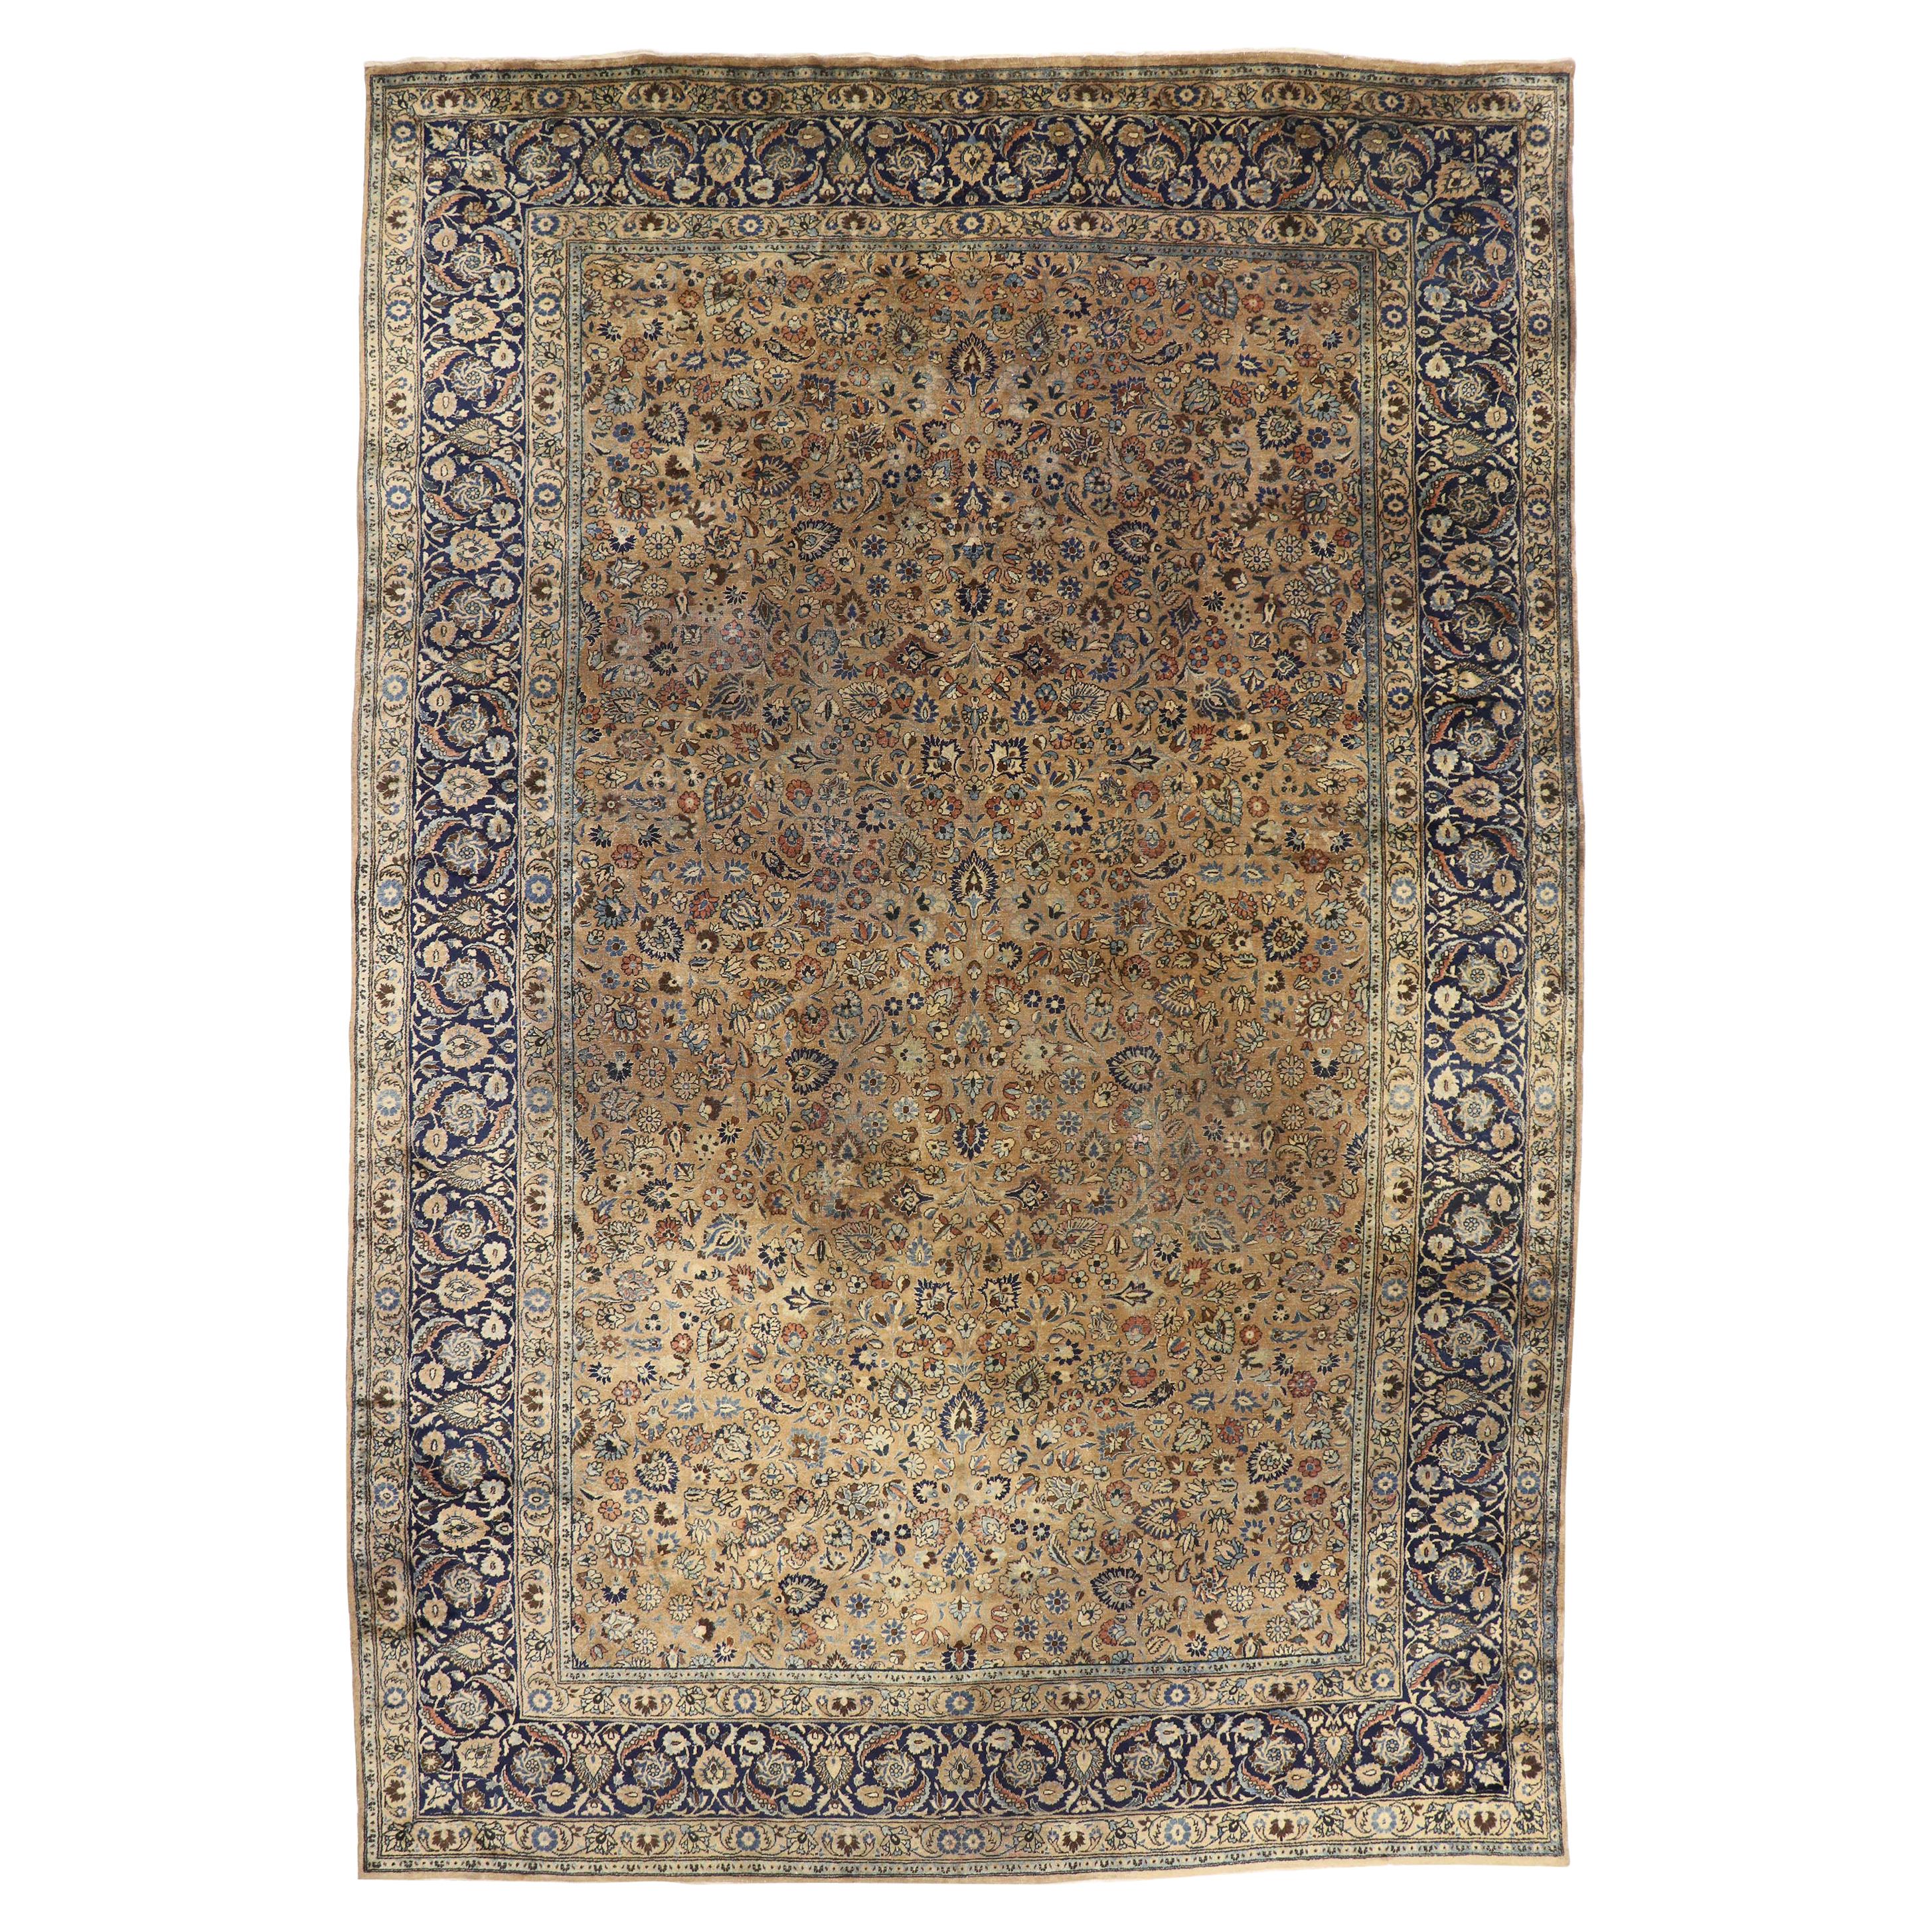 Antique Persian Mashhad Rug, Refined Elegance Meets Stately Decadence